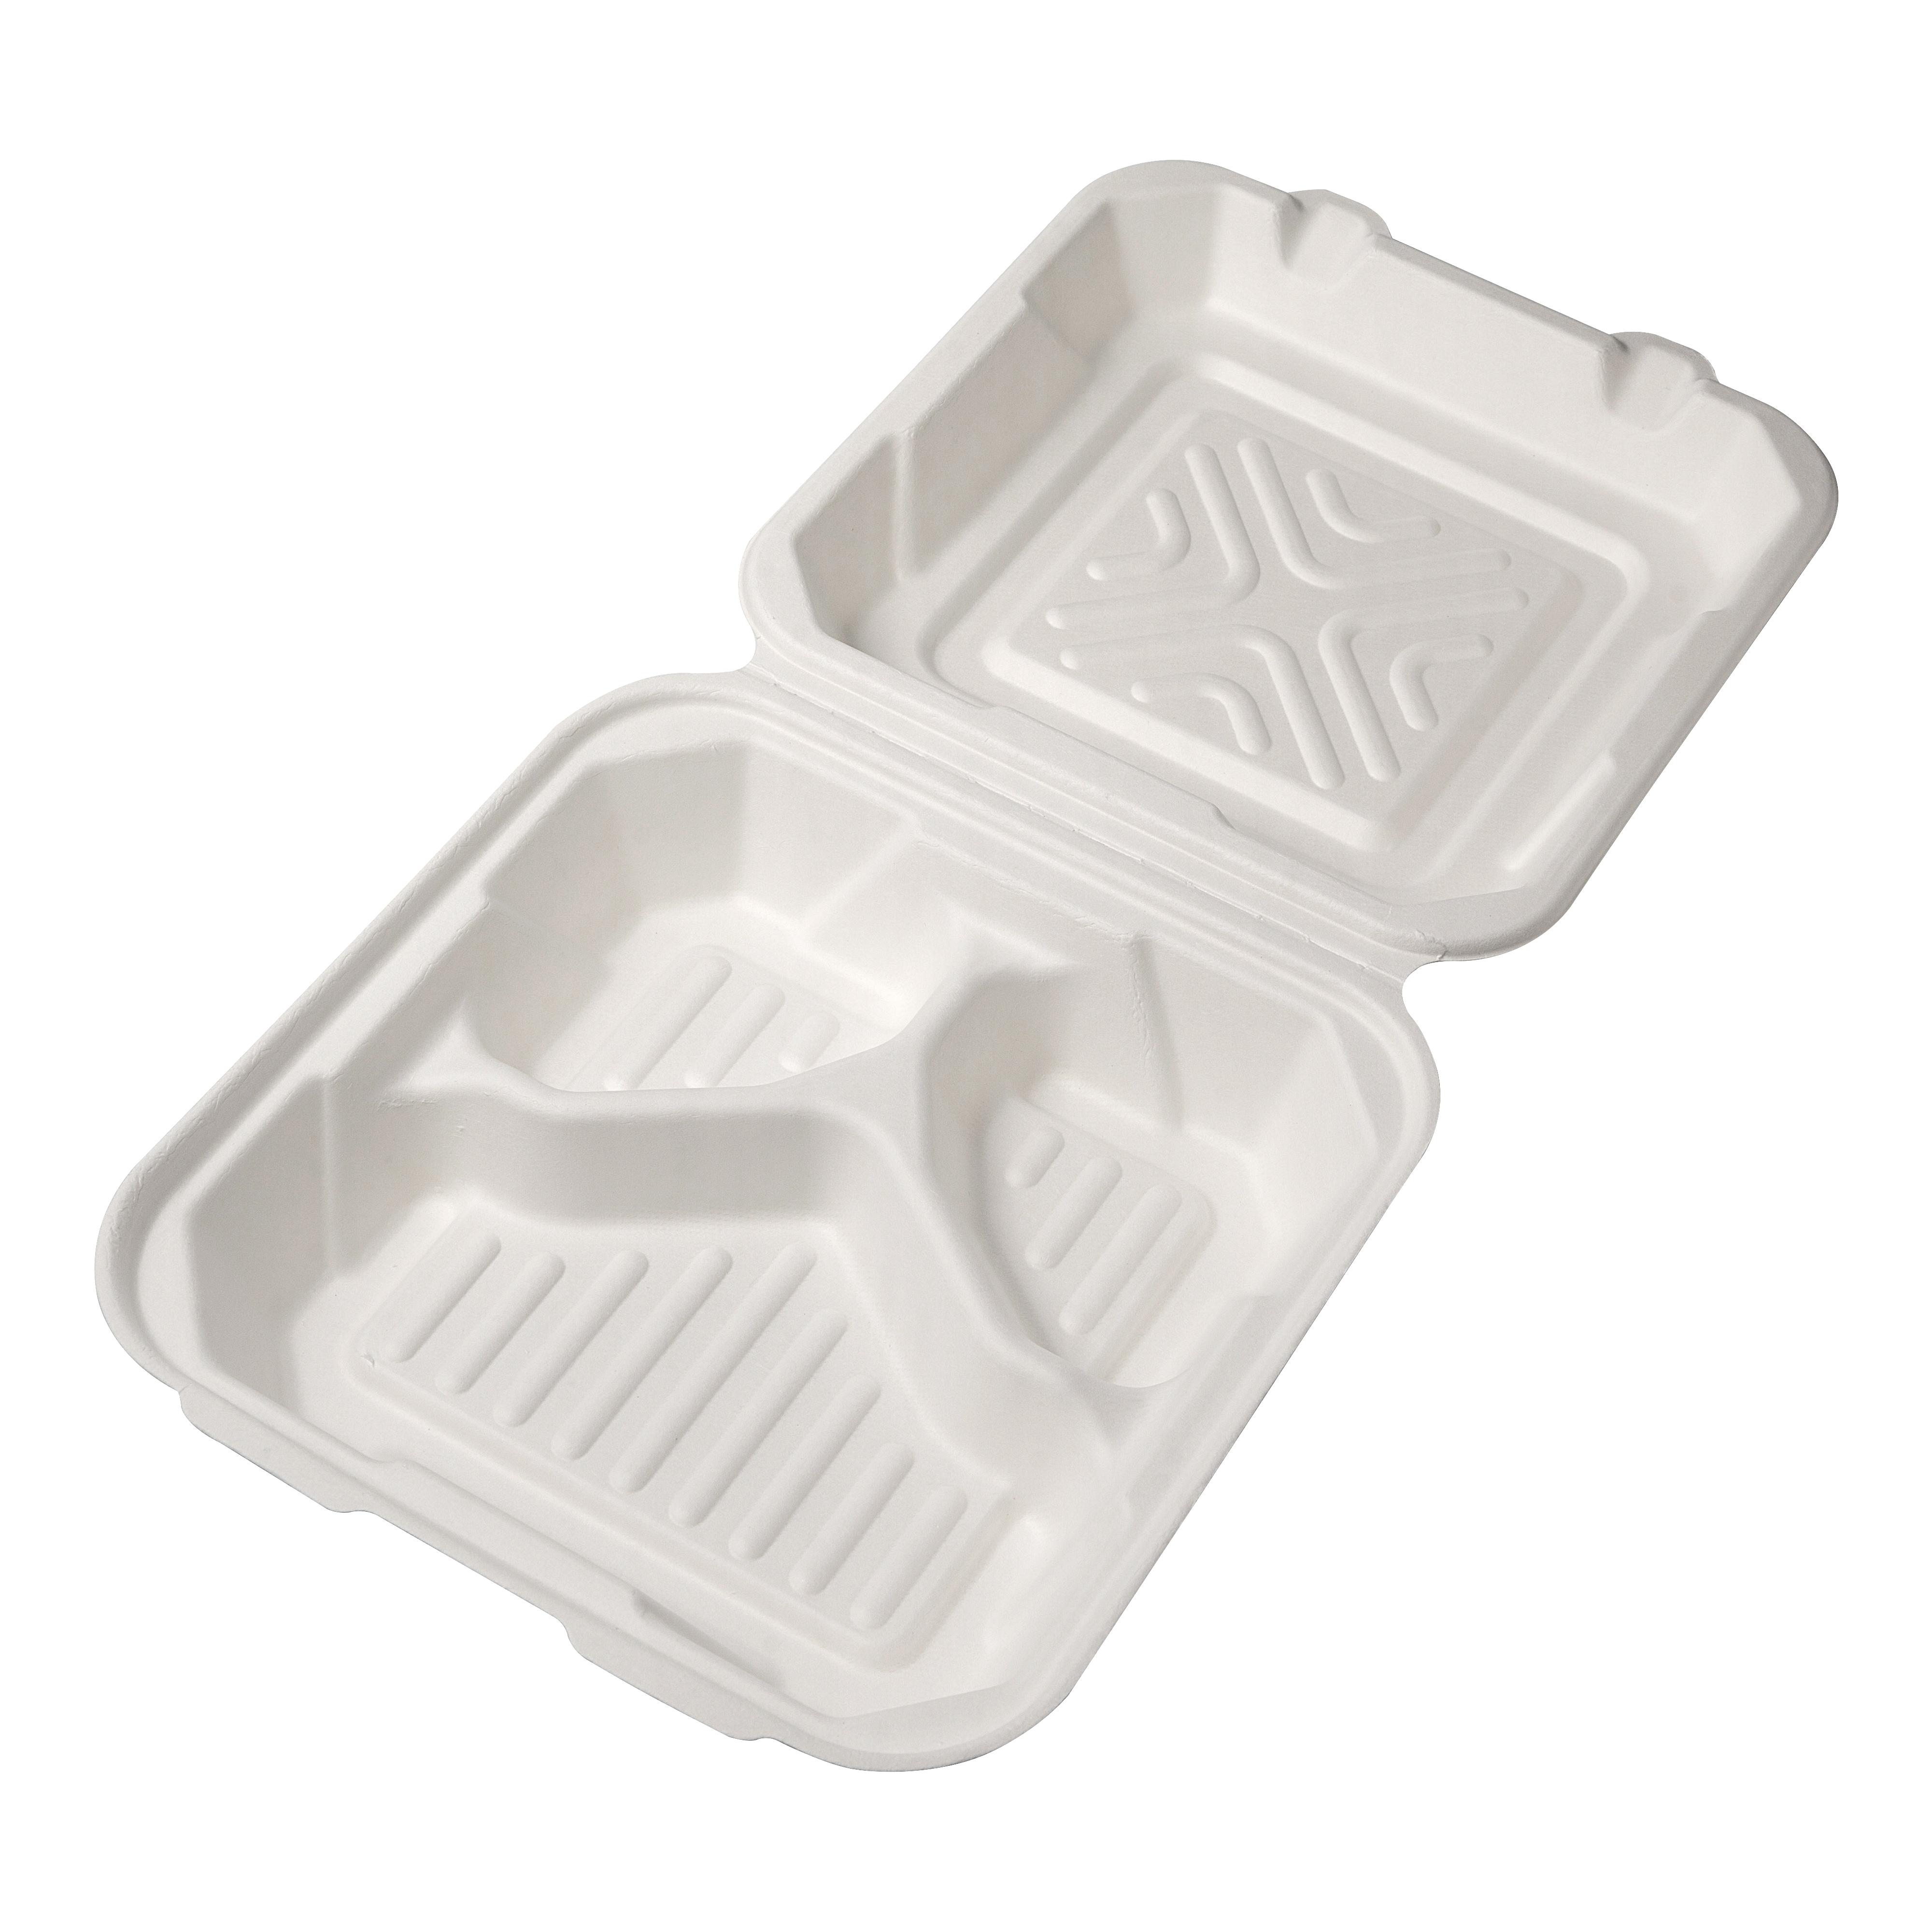 BAGASSE MEAL BOX 3 COMPARTMENT 50PK BMB3 HP4/3